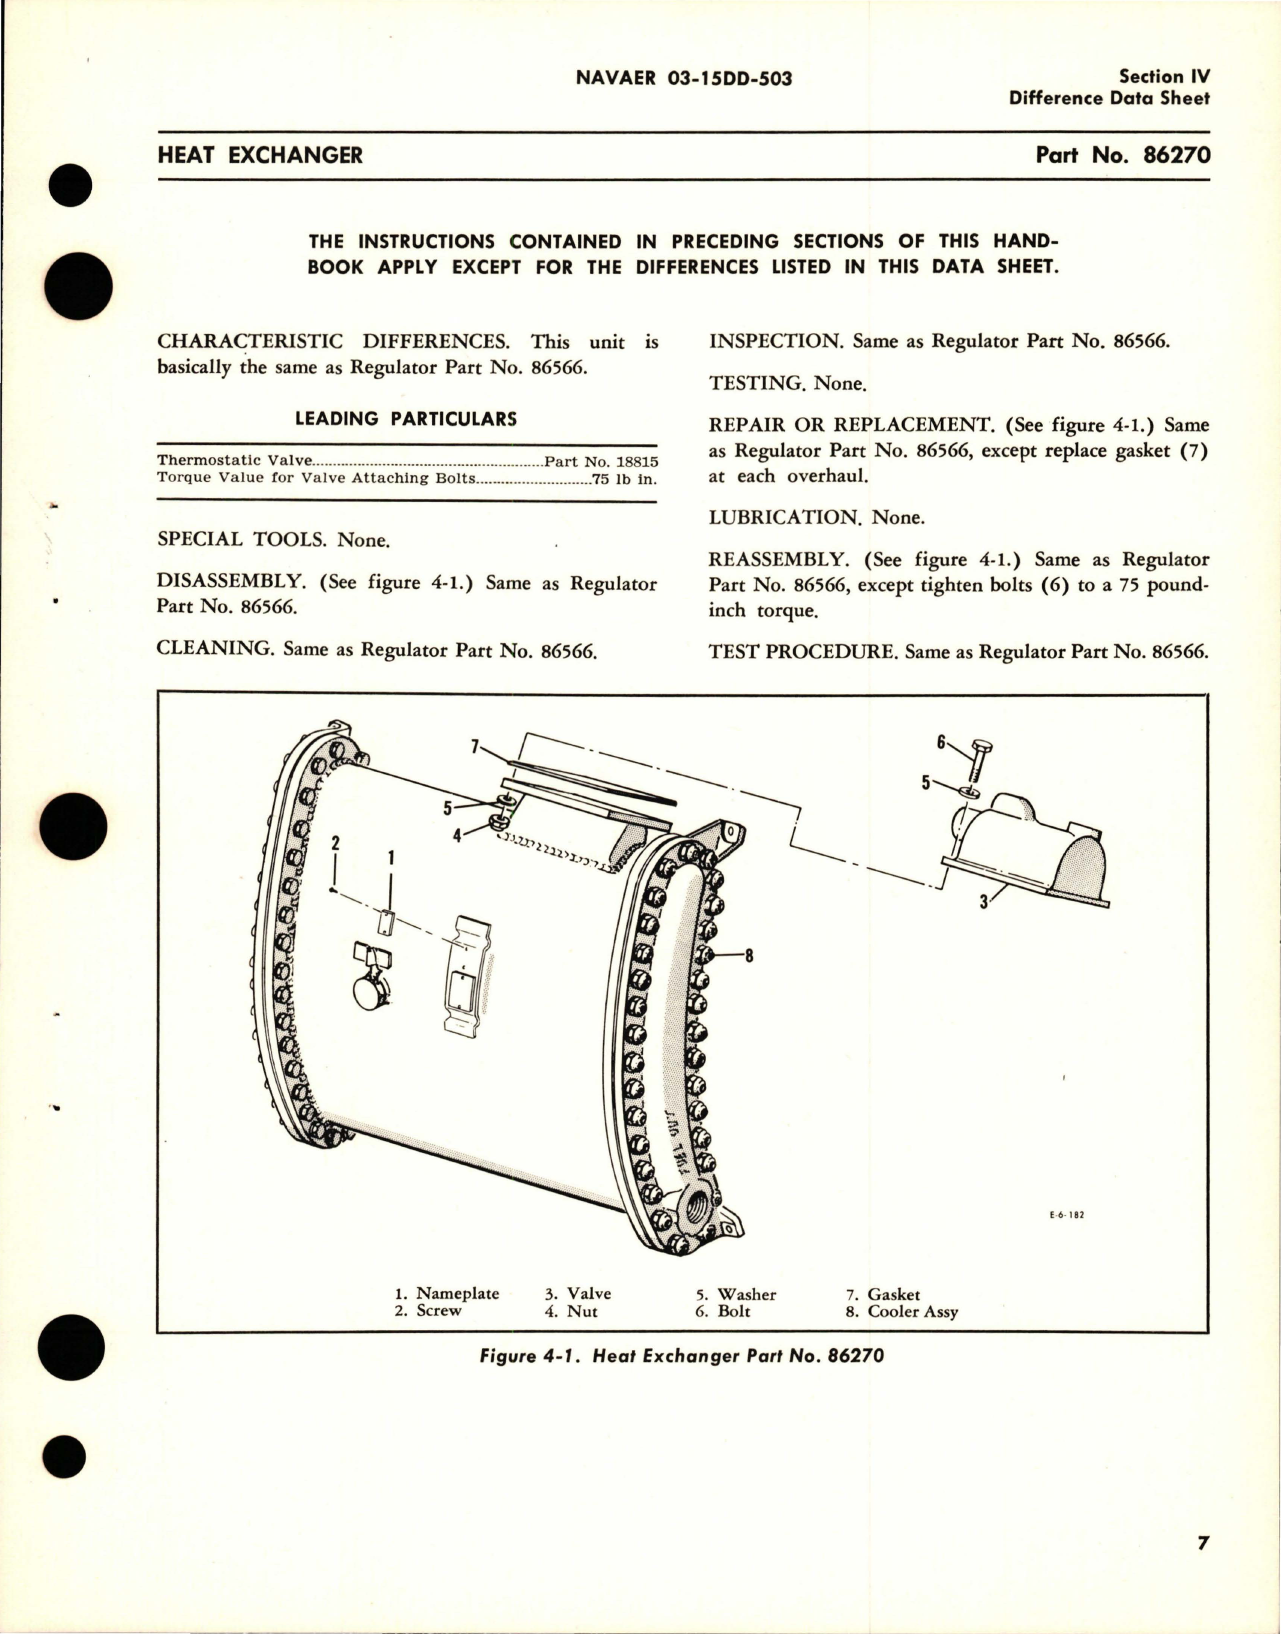 Sample page 9 from AirCorps Library document: Overhaul Instructions for Oil Temperature Regulators, Heat Exchanger and Fuel Temp Regulator